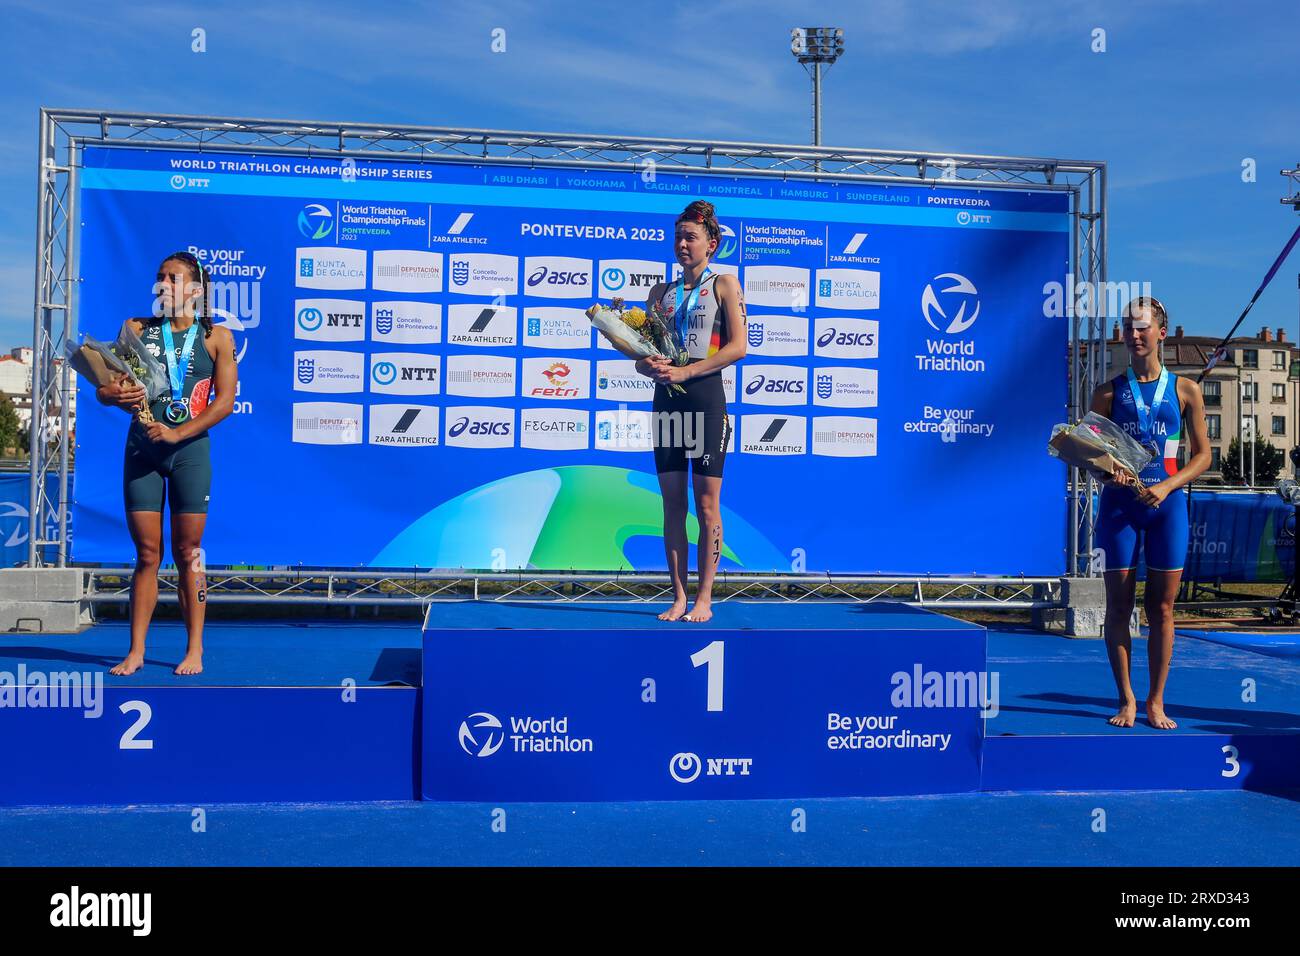 Pontevedra, Spain, 24th September, 2023: The final podium of the World Championship with the German triathlete, Selina Klamt, the Portuguese triathlete, Maria Tomé (L) and the Italian triathlete, Angelica Prestia (R) during the Triathlon World Championships 2023 Women's Sub23, on September 24, 2023, in Pontevedra, Spain. Credit: Alberto Brevers / Alamy Live News. Stock Photo